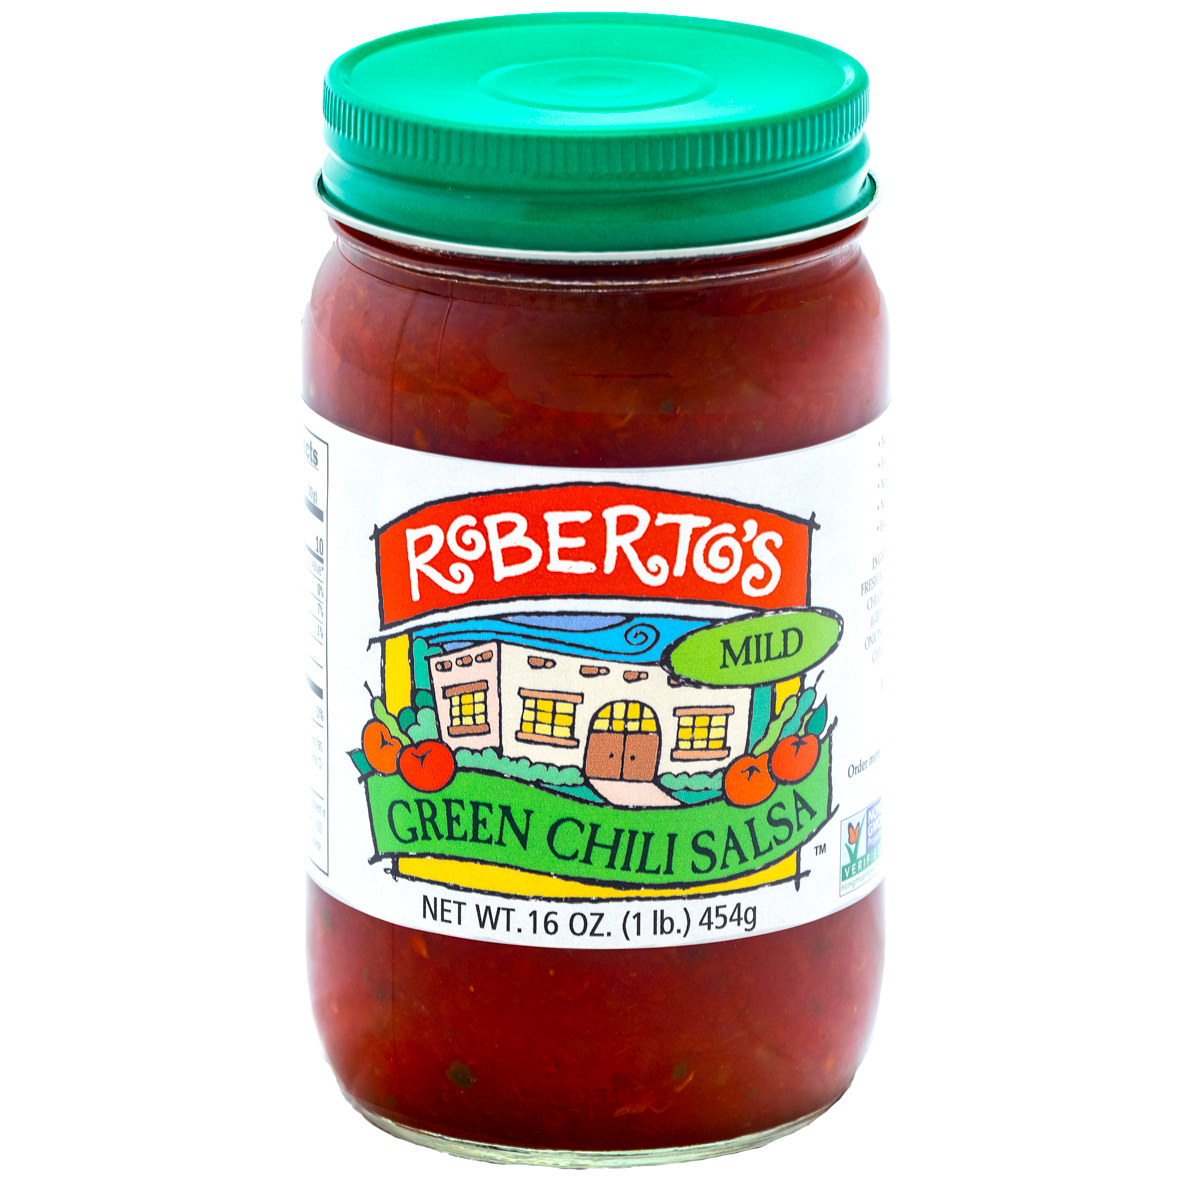 This Roberto's organic mild green chili salsa is red in color but homemade in colorado within the high rocky mountains by the Roberto's family. This salsa is mild and not too spicy or hot. 8 ounce jar.